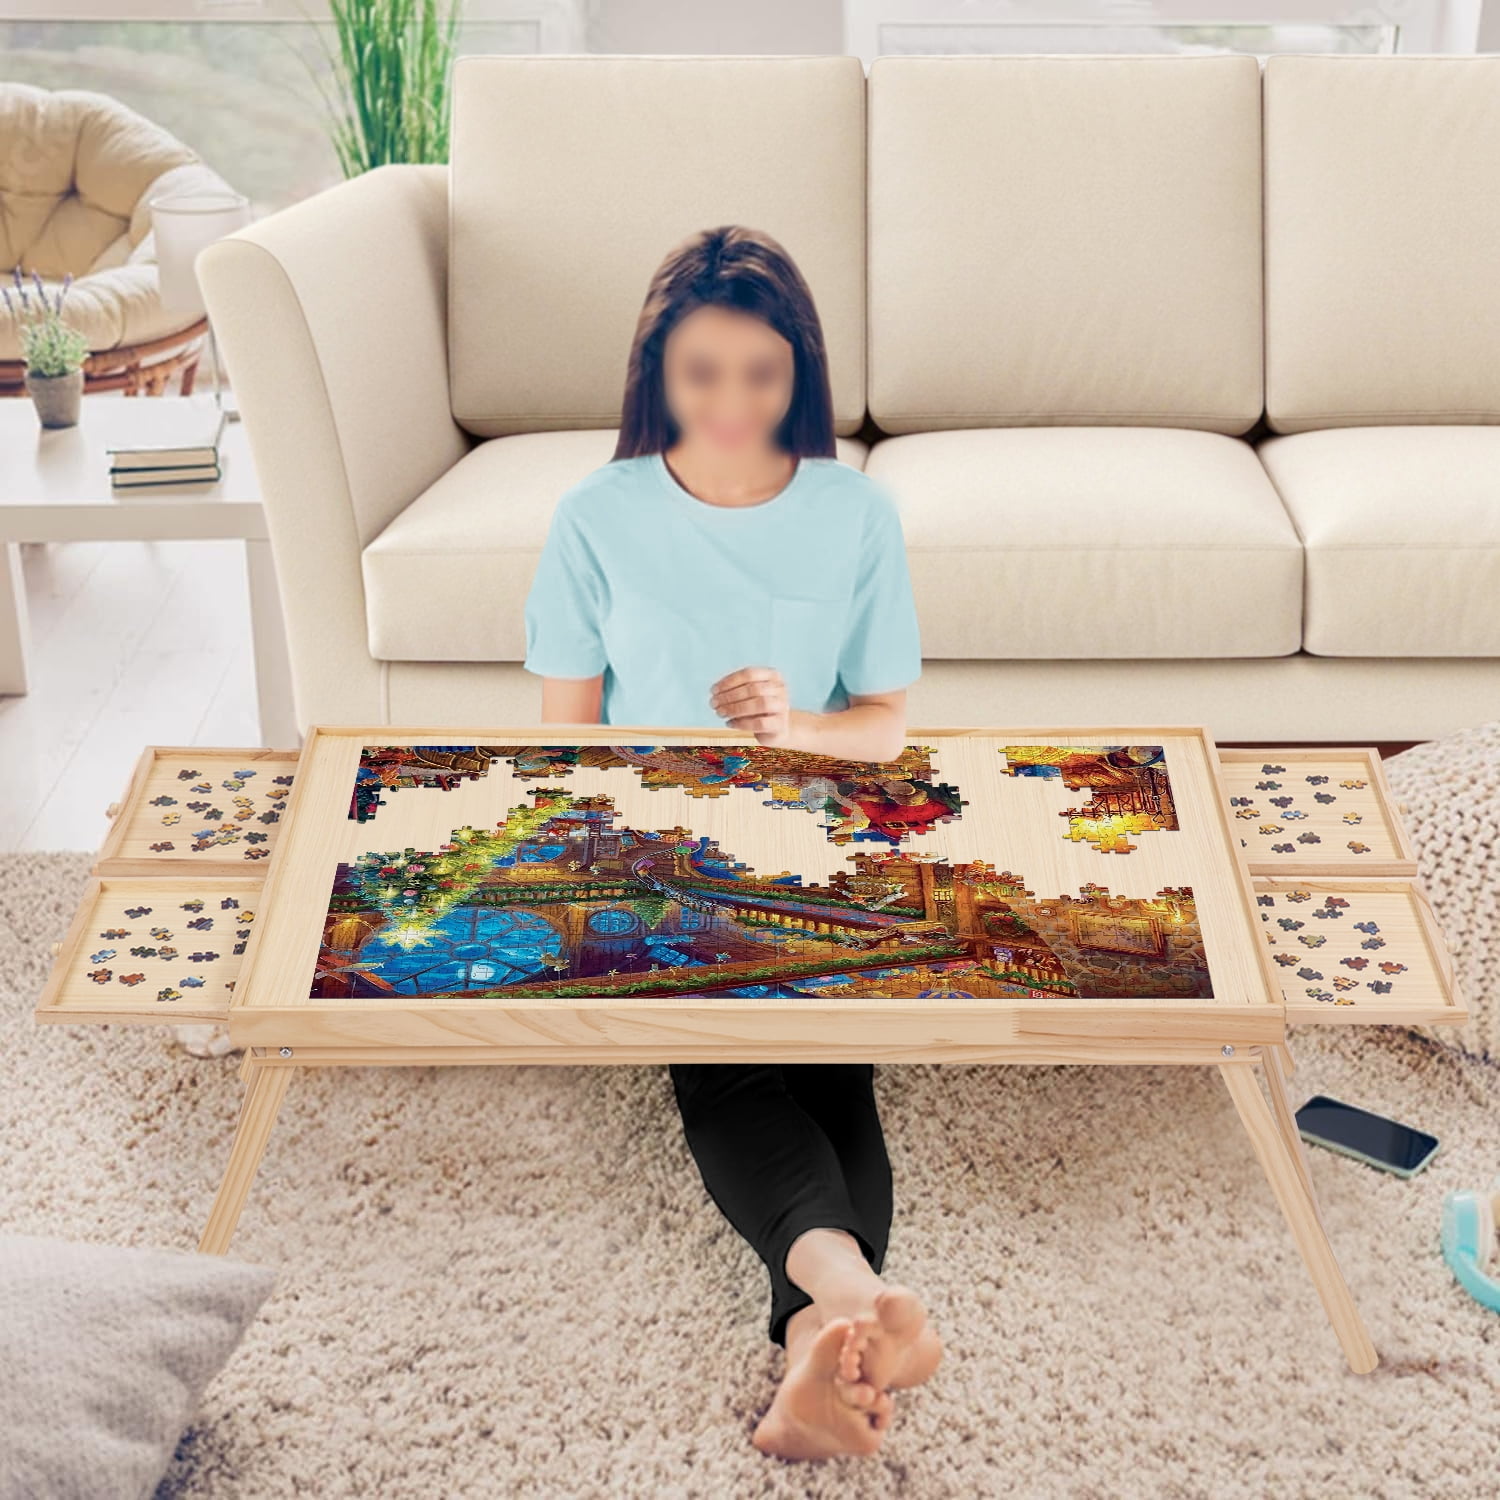 Puzzle Board With Foldable Legs 4 Drawers & Cover Wooden Puzzle Table  Puzzle Tray Portable for Sale in La Verne, CA - OfferUp